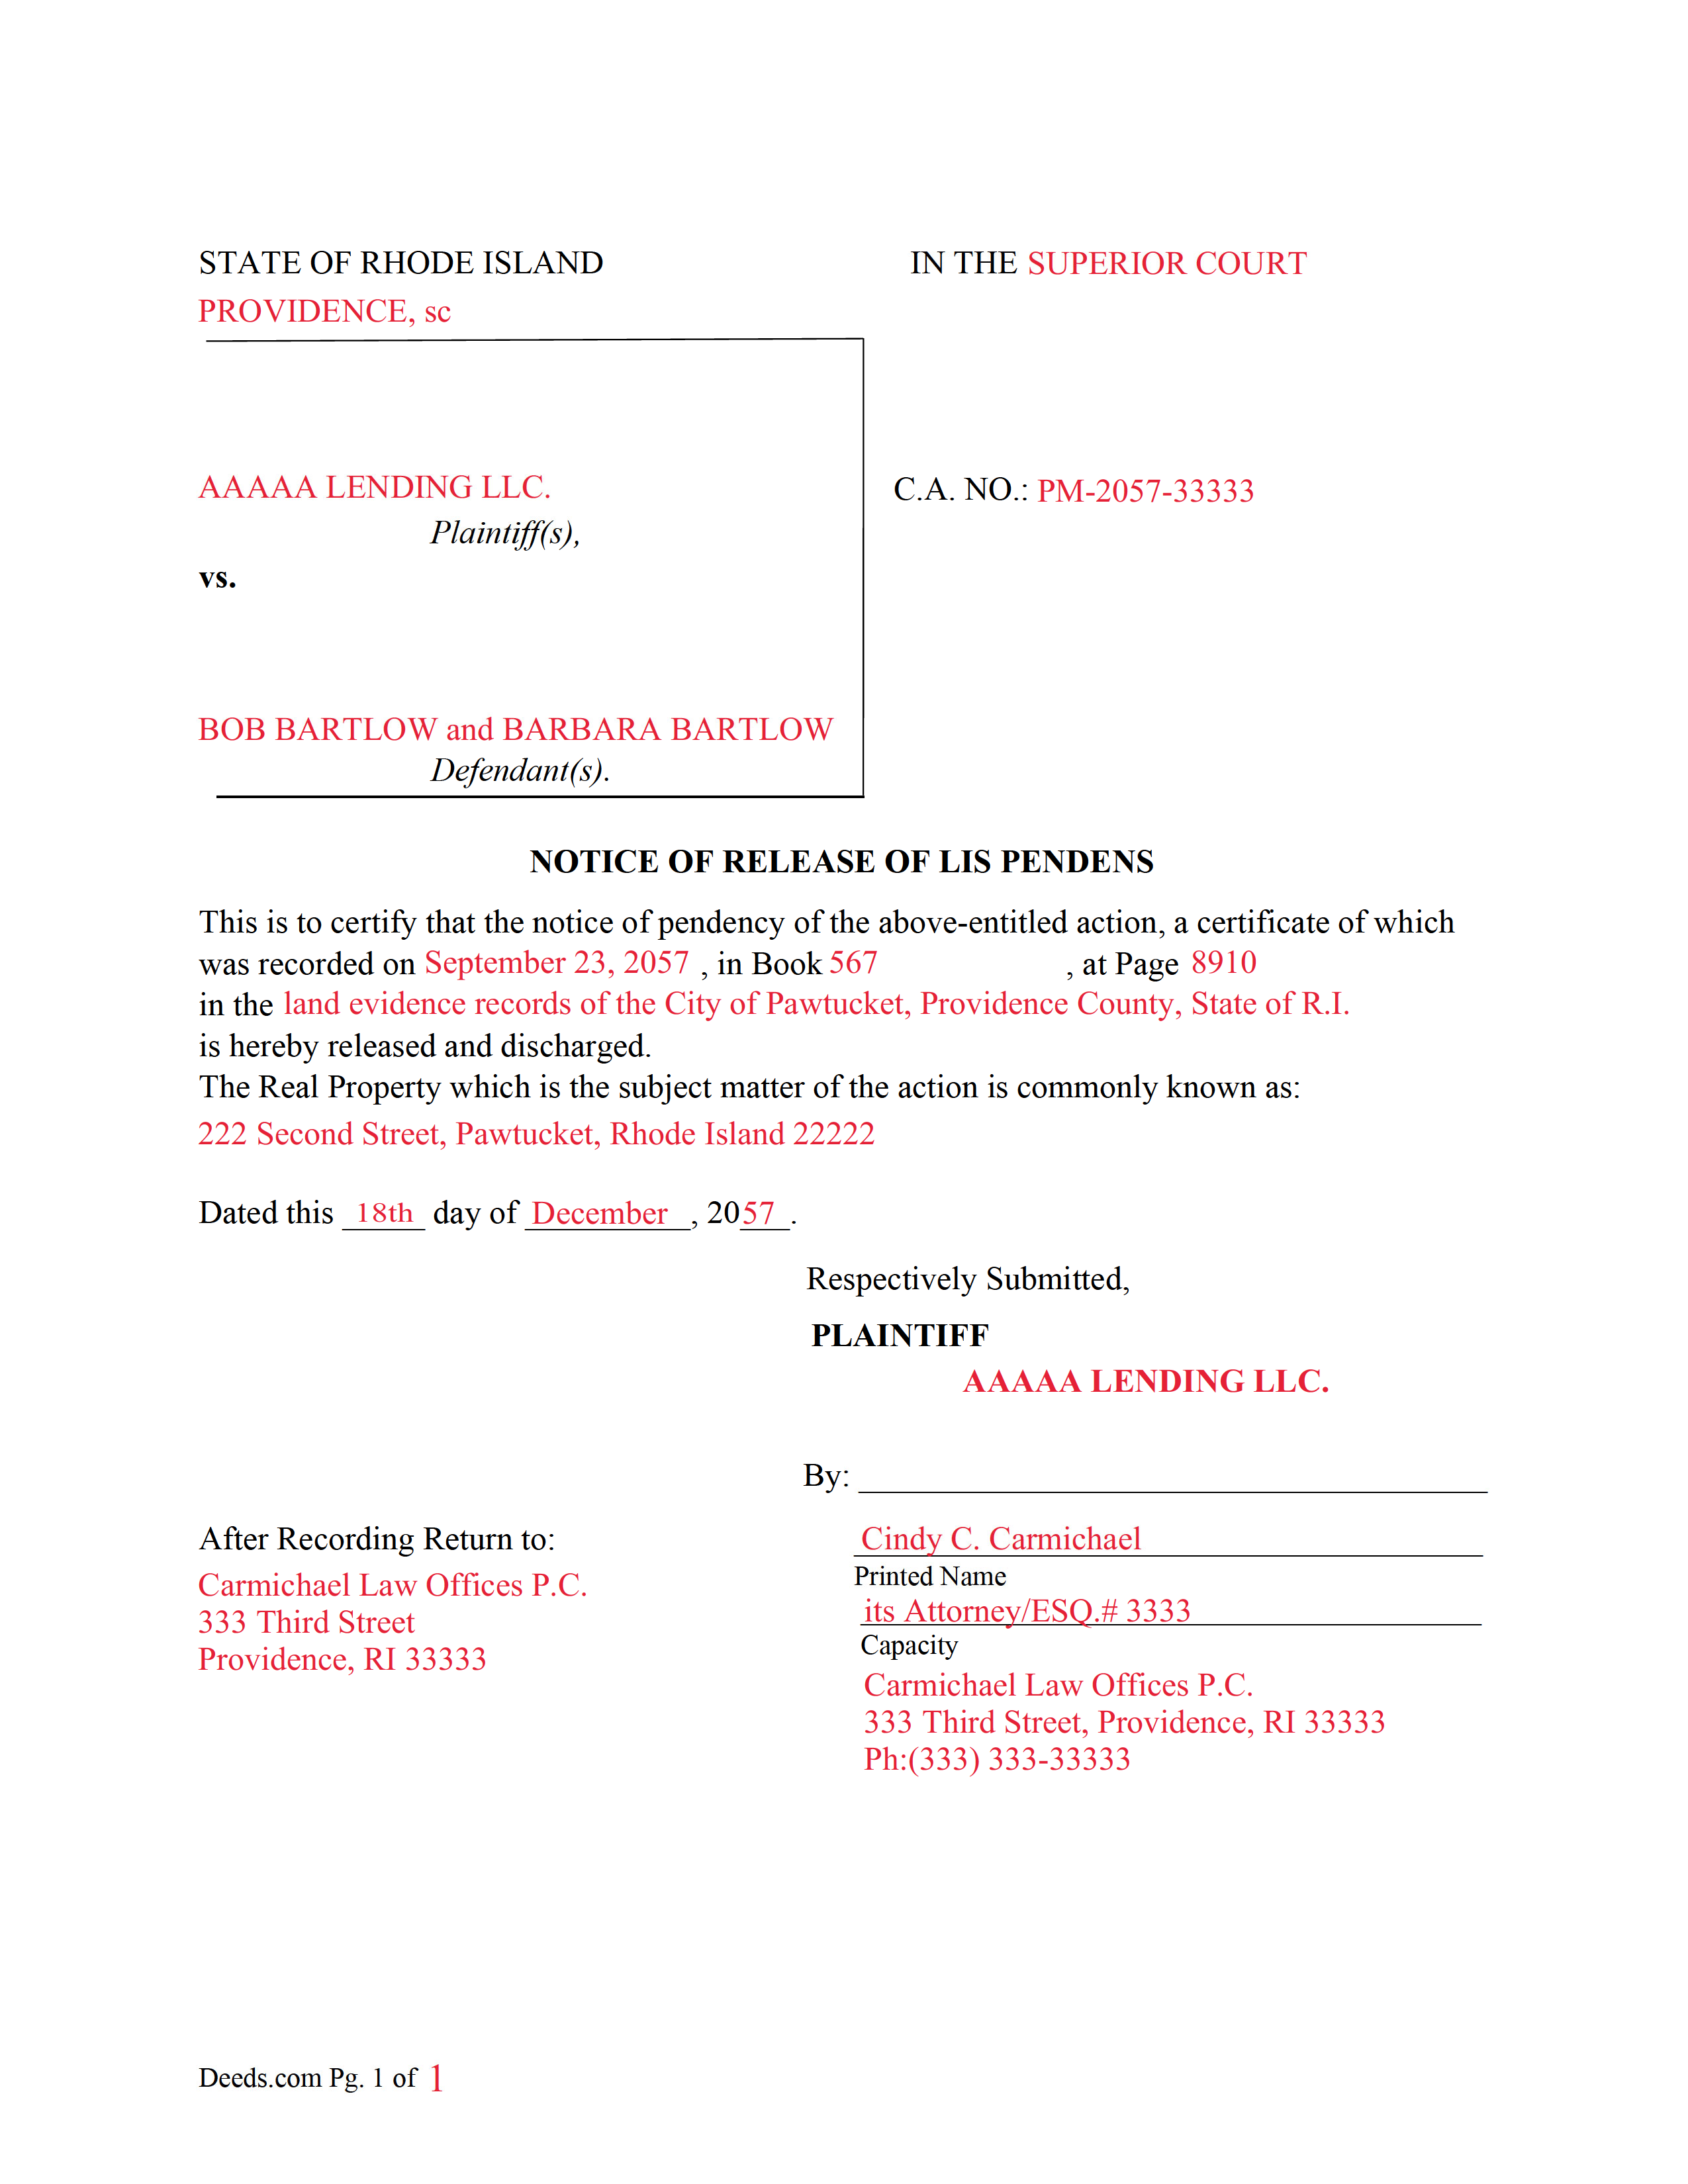 Completed Example of Notice of Release Document